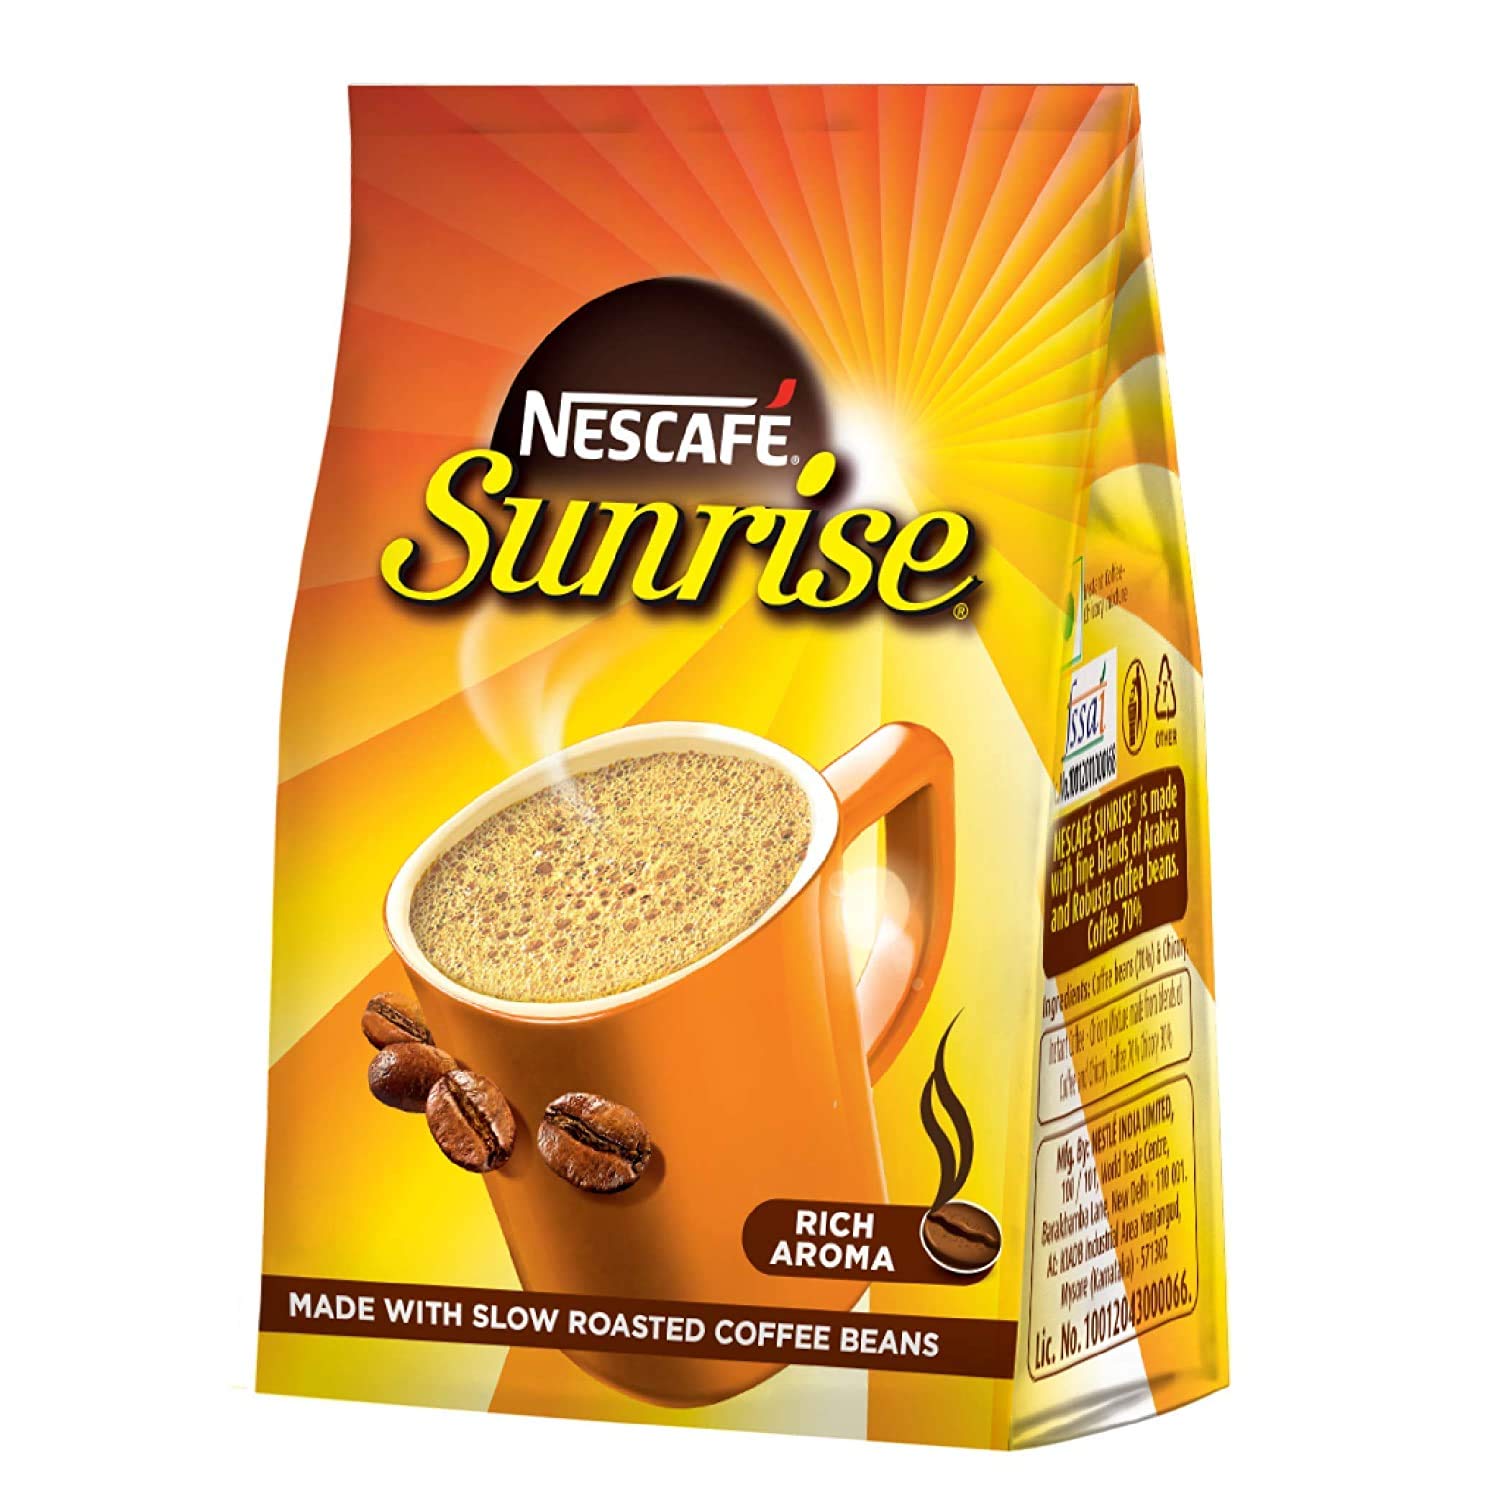 NESCAFE Sunrise Rich Aroma, Instant Ground Coffee Pouch-Chicory Mix, 200g Stabilo | Made With Slow Roasted Coffee Beans